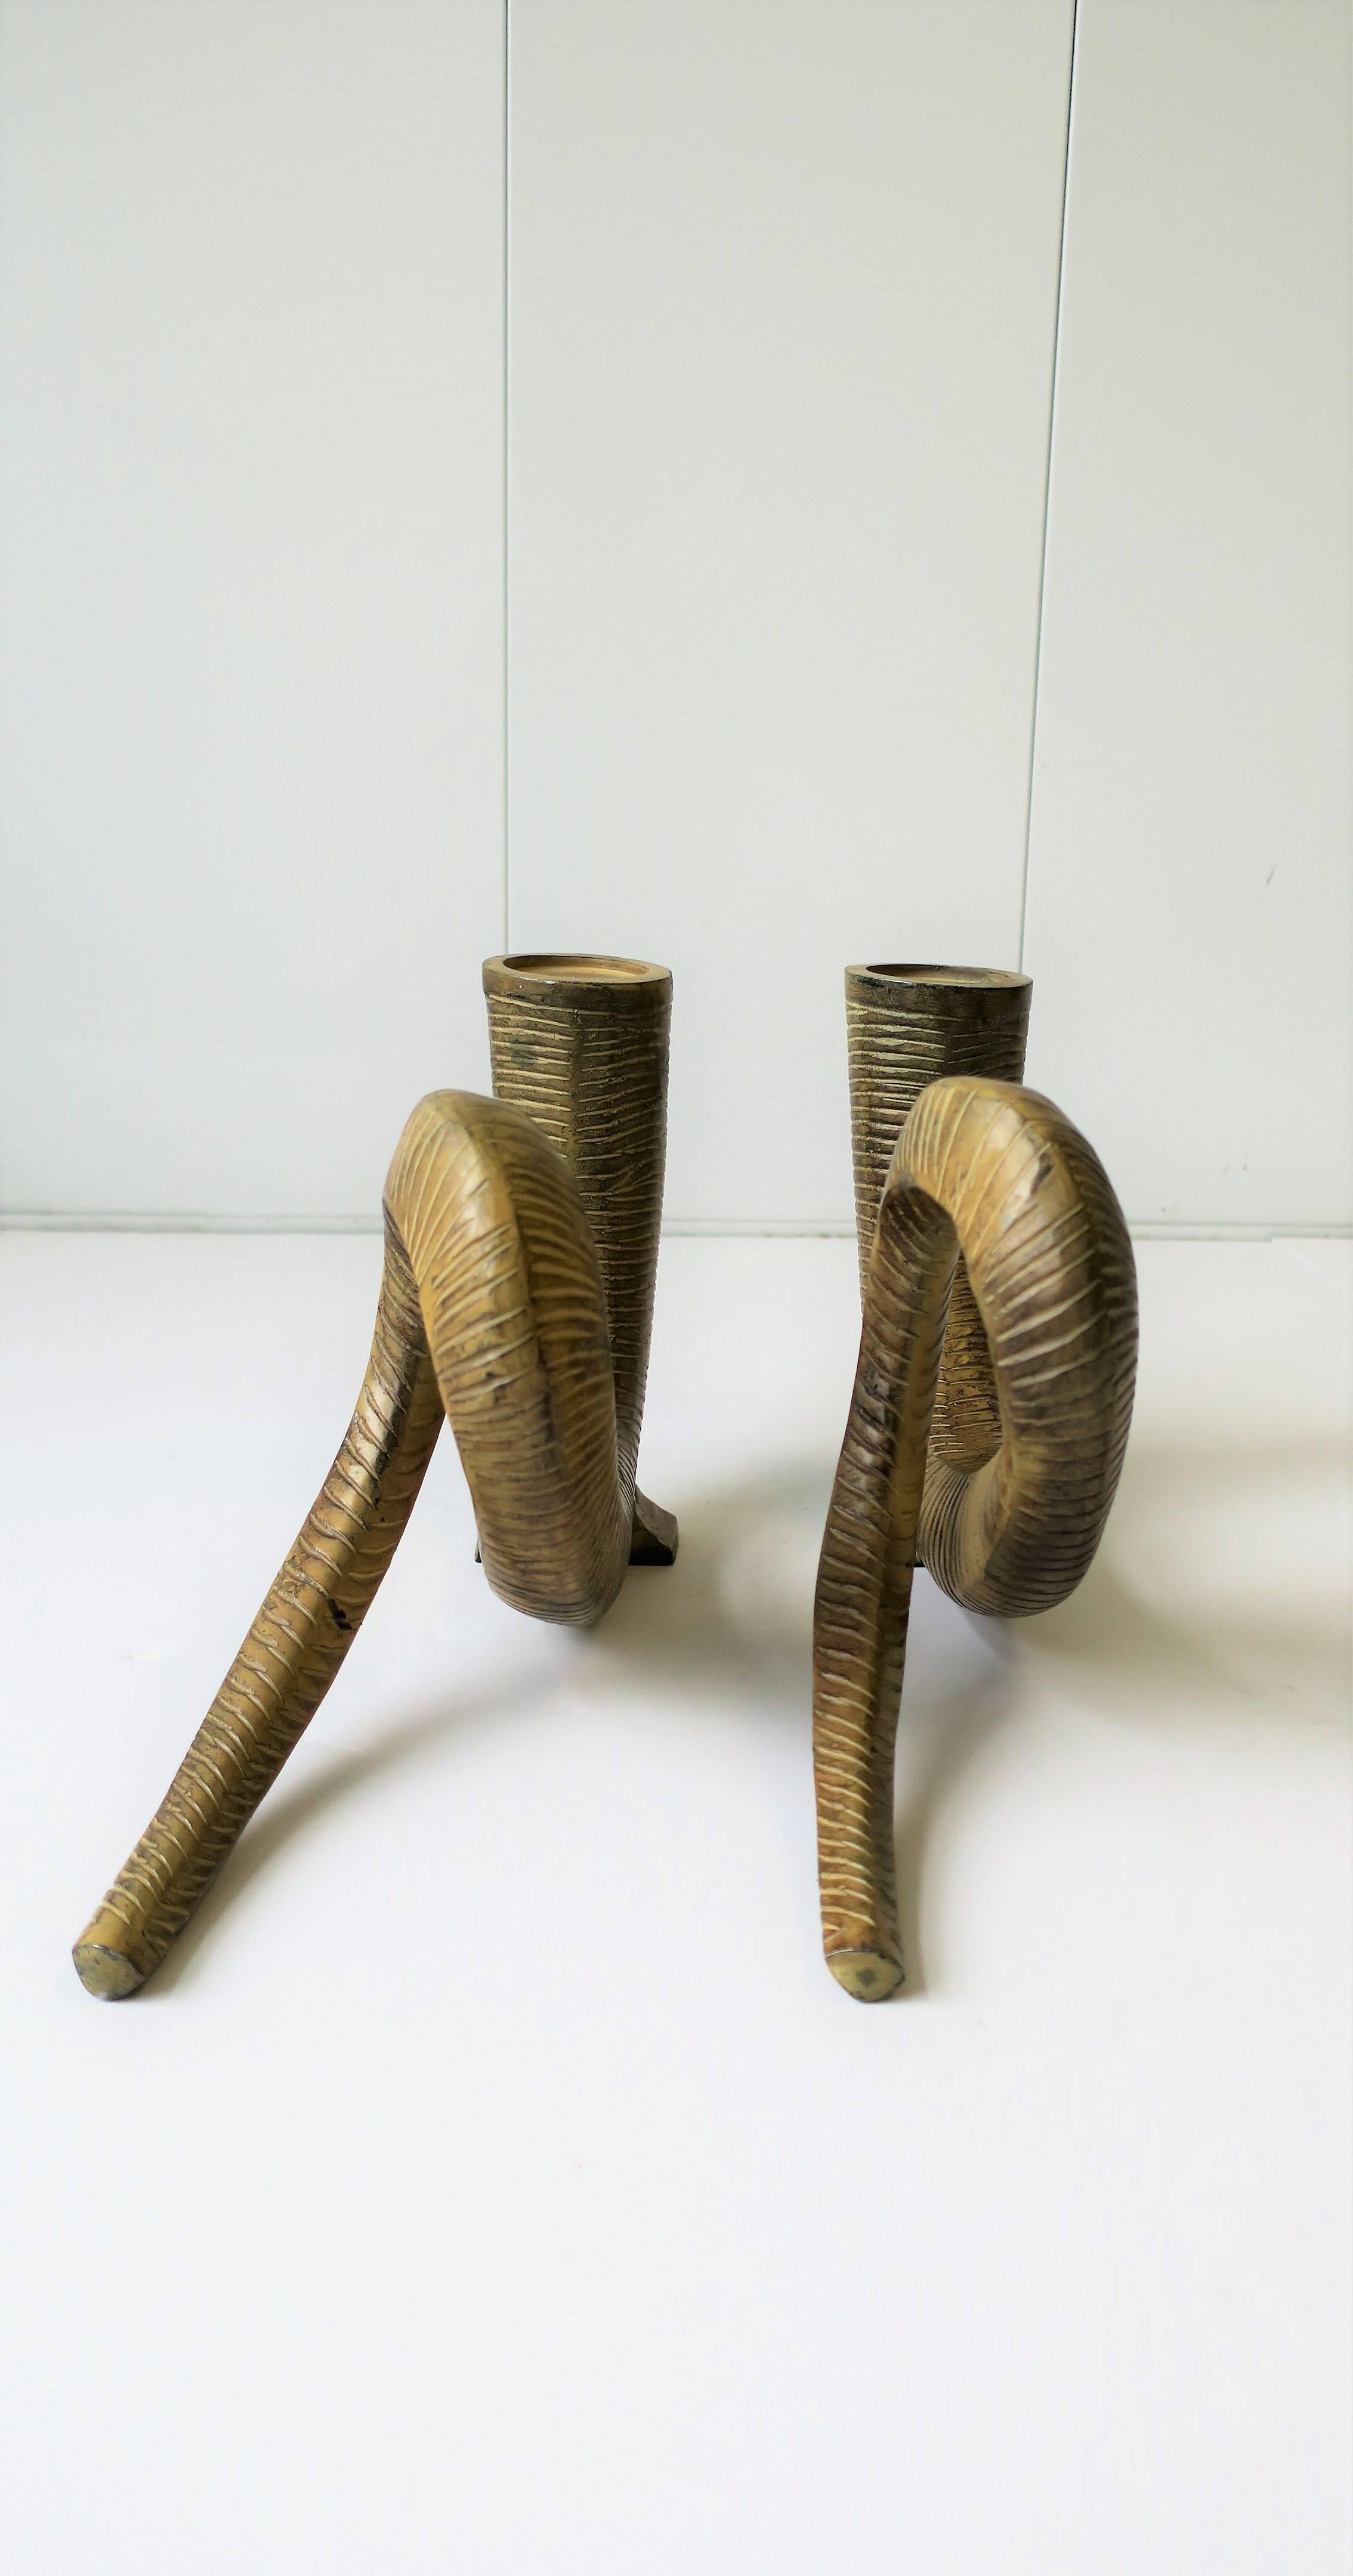 80s Metal Animal Rams Horn Sculptures or Candlestick Holders 2